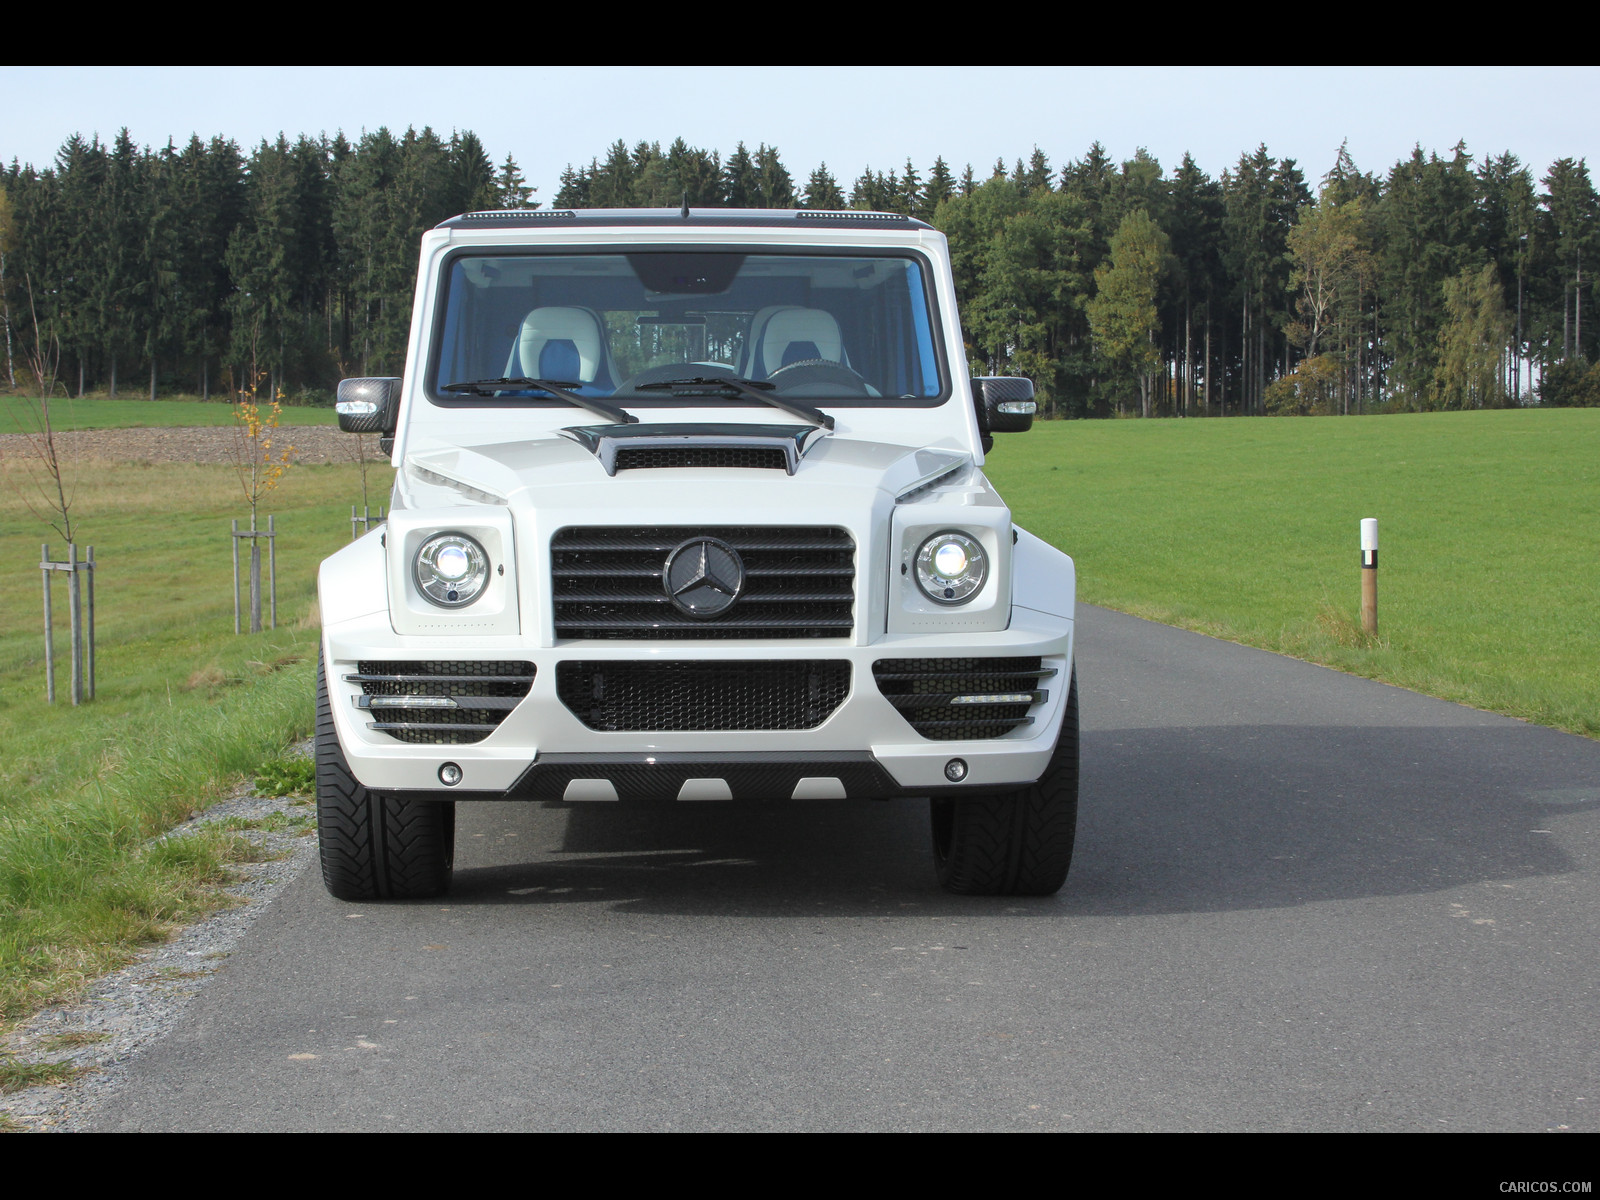 Mansory G-Couture based on Mercedes G-Class White - Front, #30 of 39